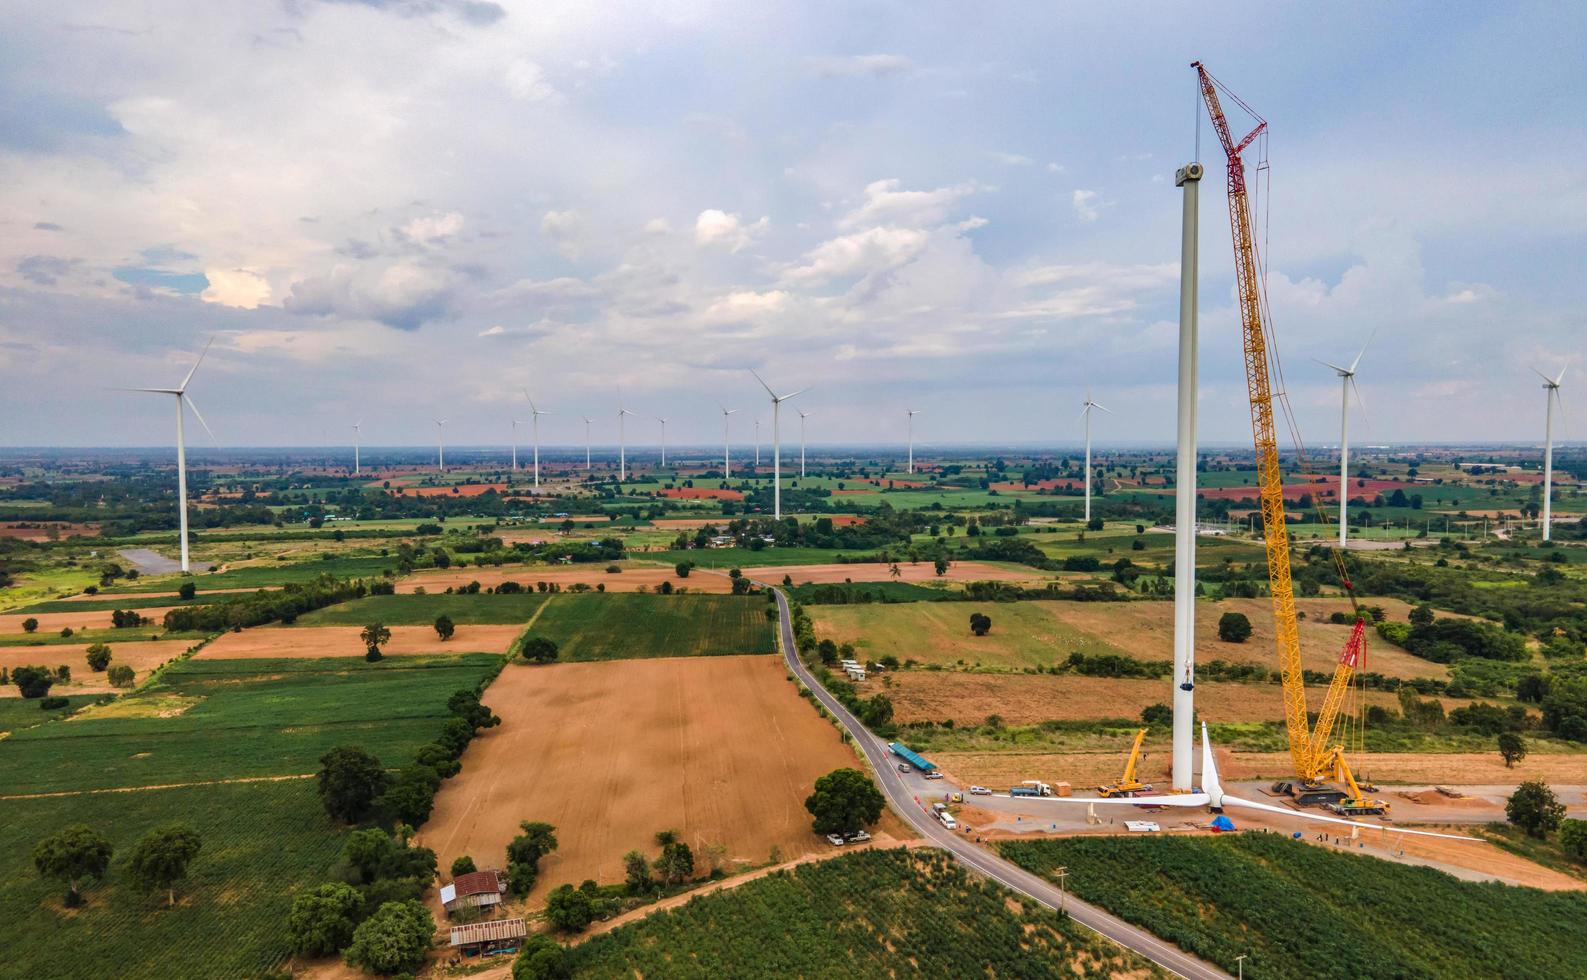 Panoramic view of wind farm or wind park, in the meadow field  are one of the cleanest, renewable electric energy source. with high wind turbines for generation electricity. Green energy concept. photo